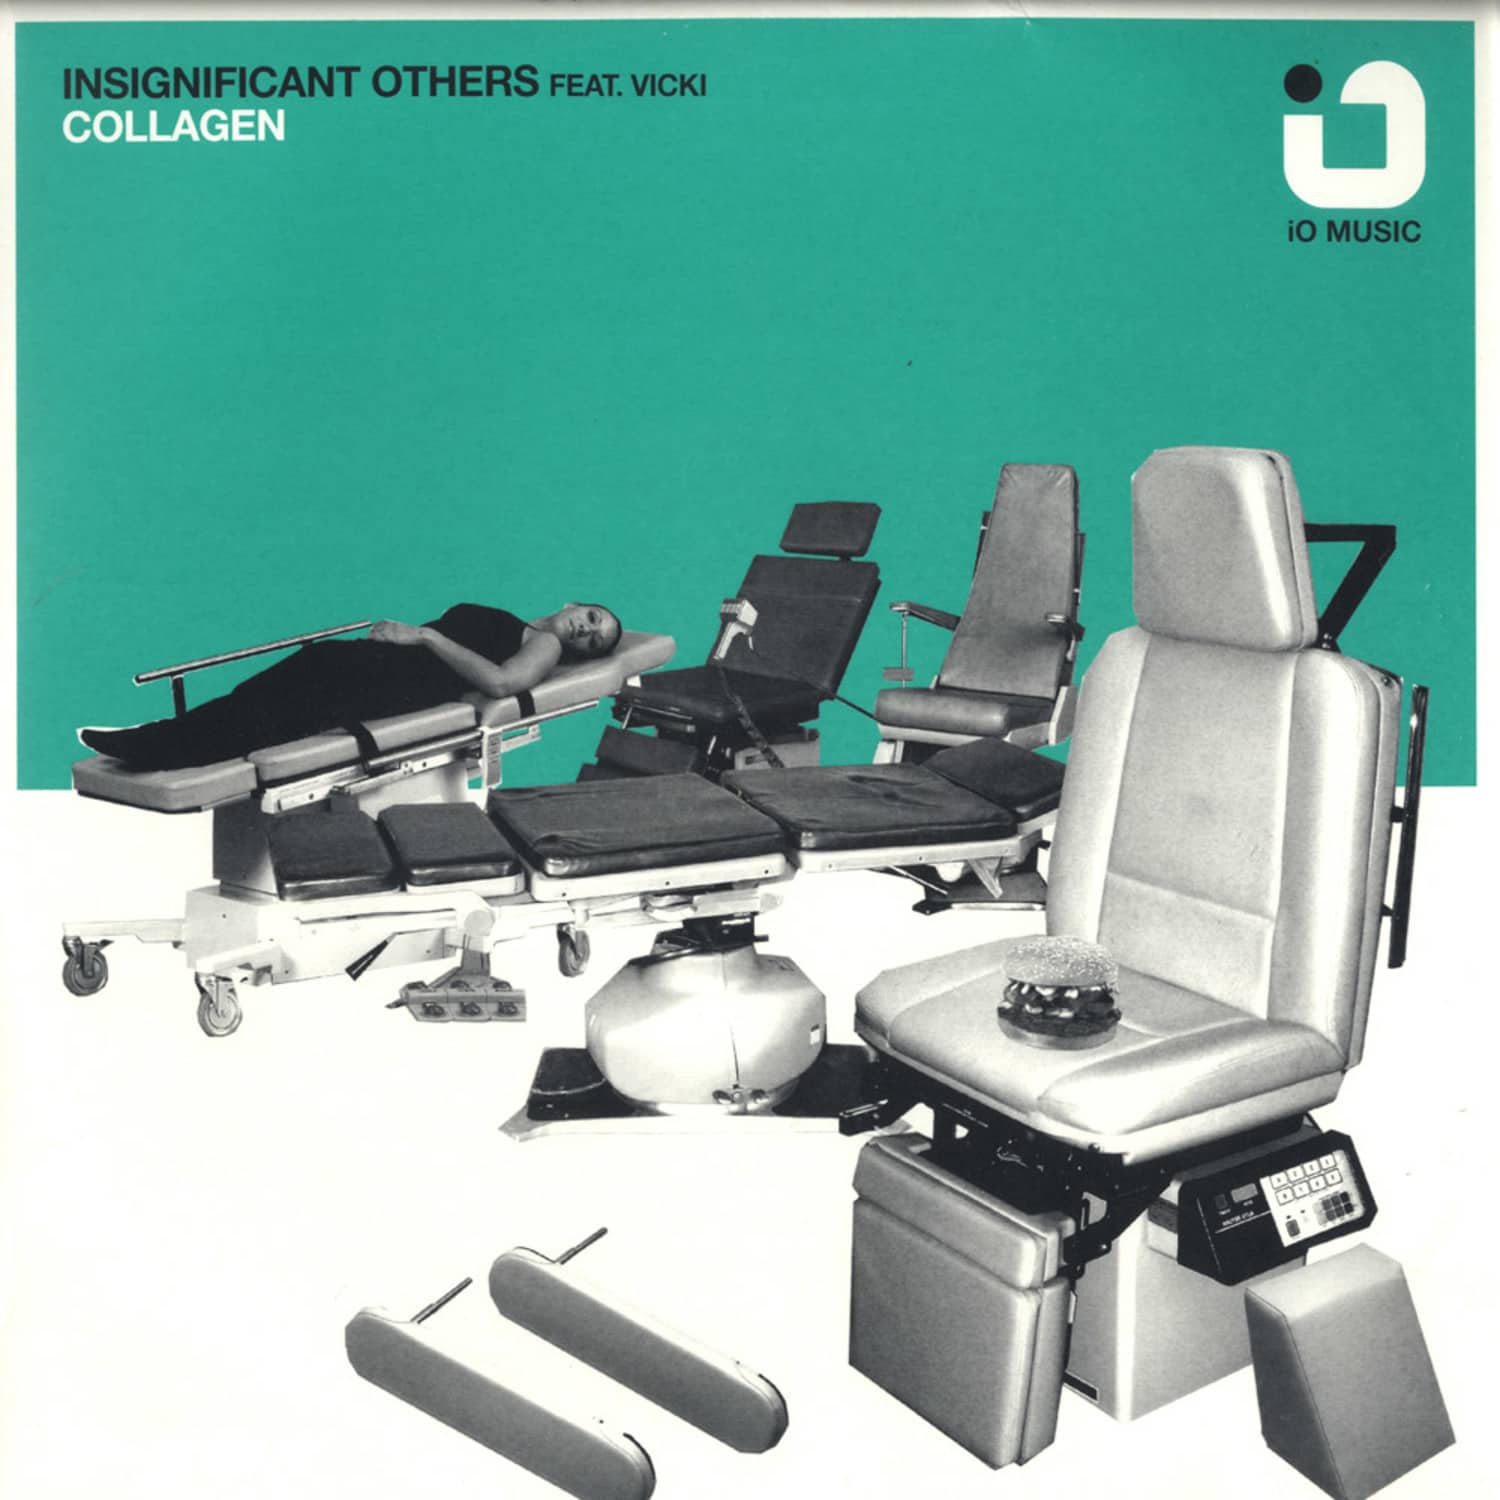 Insignificant Others - COLLAGEN